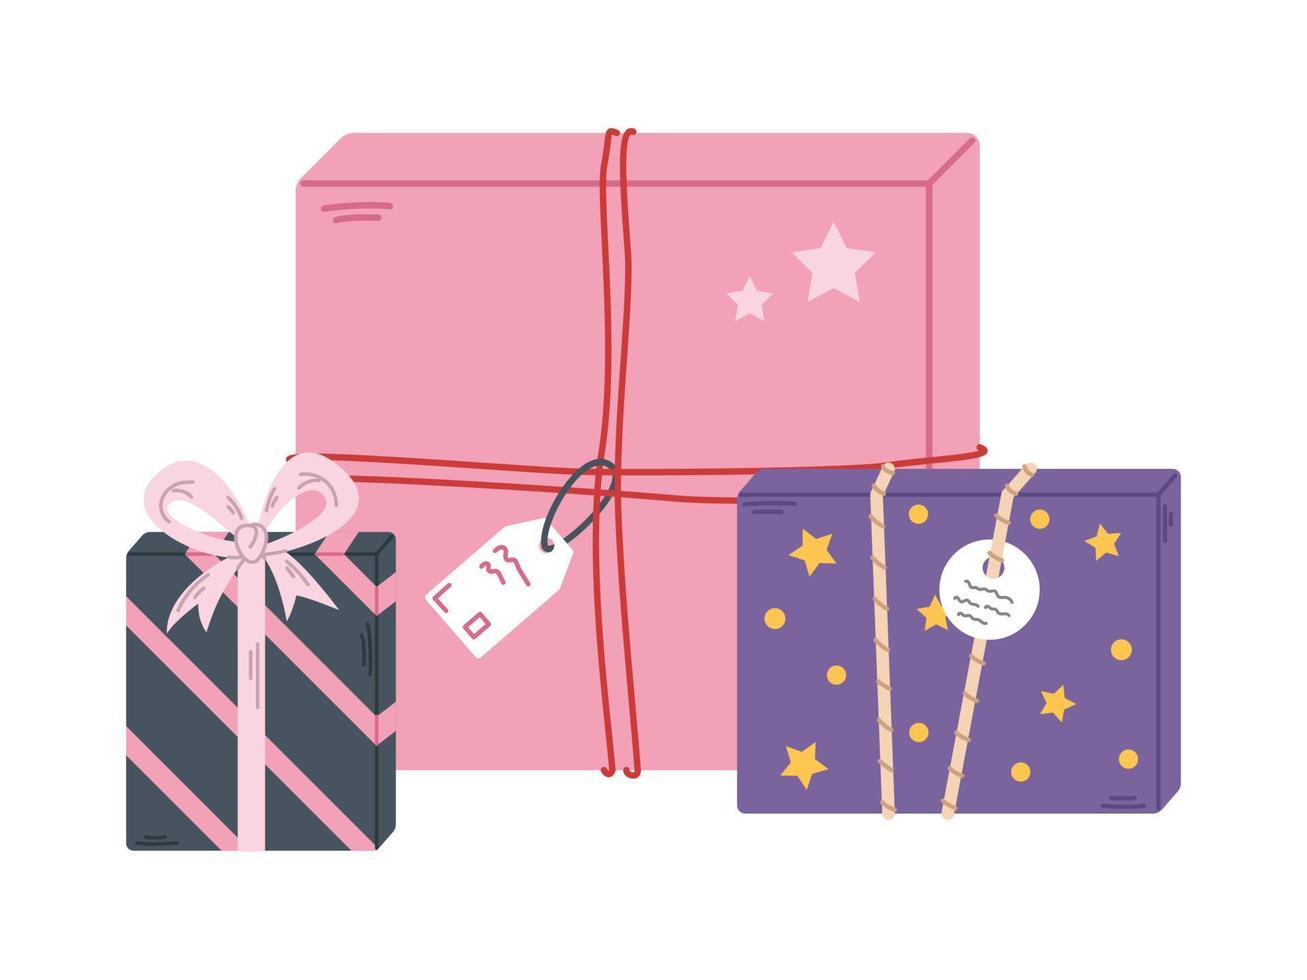 Vector illustration with gift boxes. Presents with ribbon, rope and bow. Gifts with labels. Striped present and gifts with stars for Christmas, Birthday or other celebration in flat design.